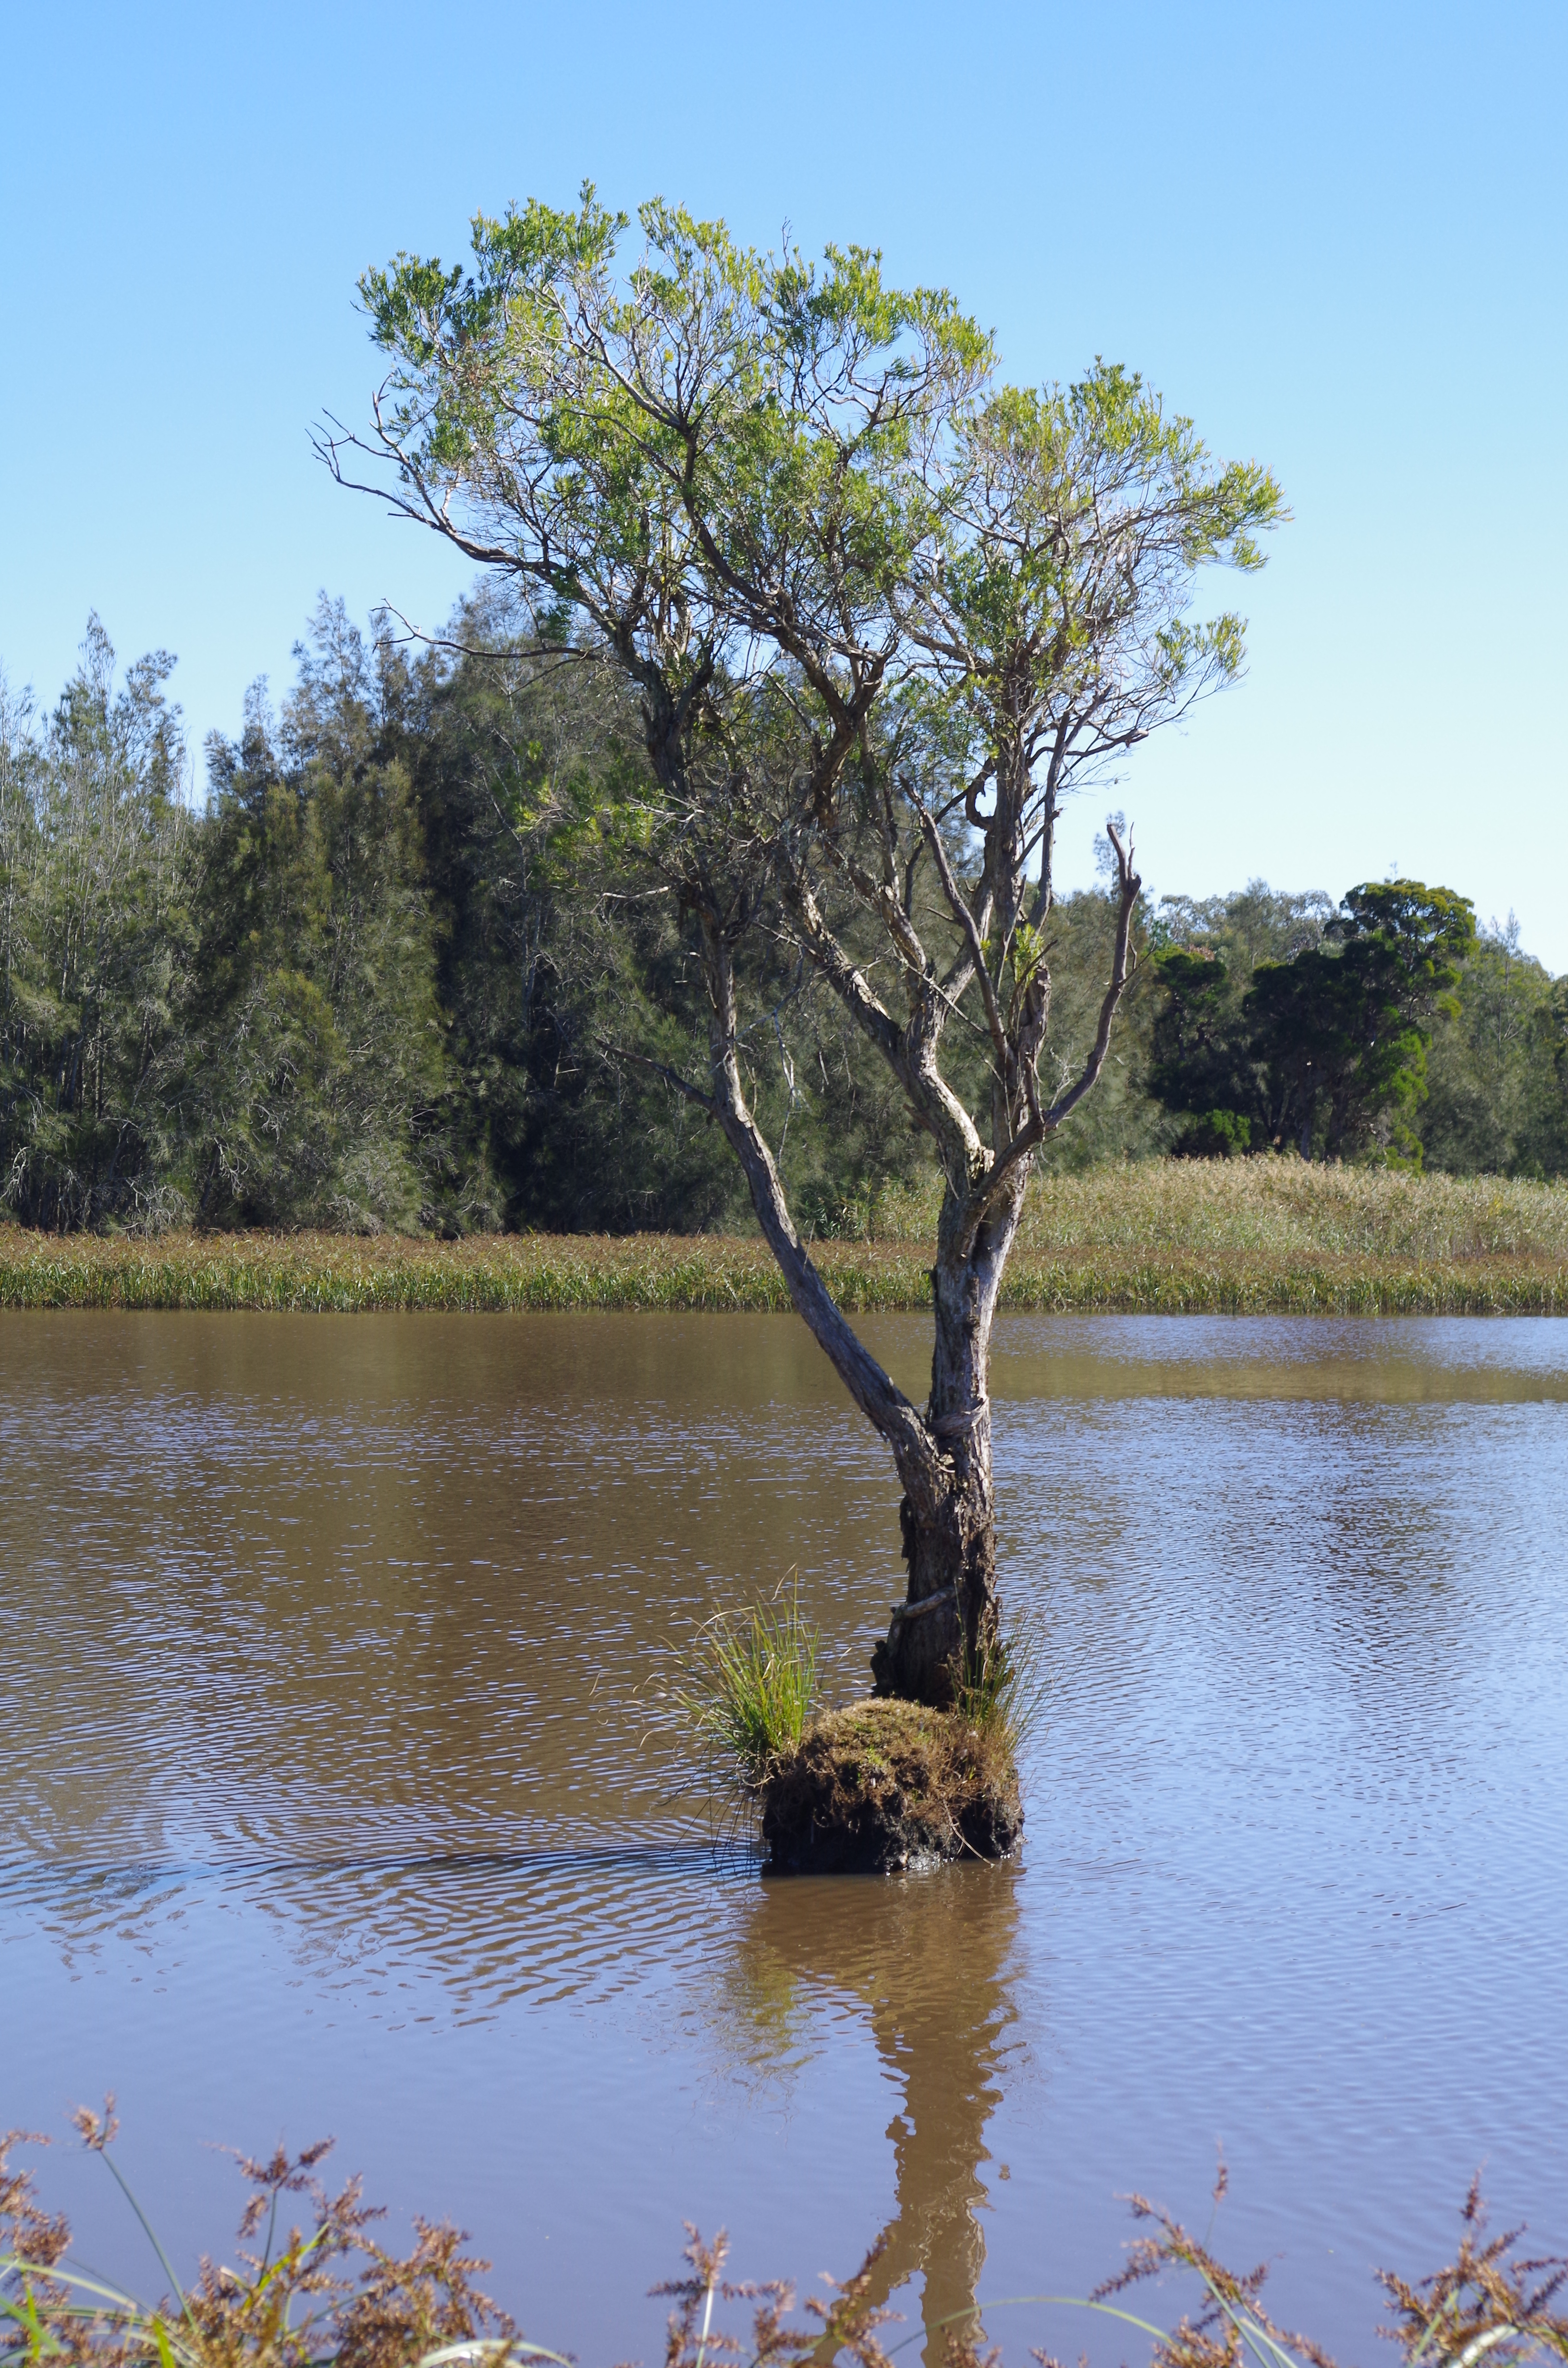 A single melaleuca stands in the middle of a shallow waterlogged space, in the distance is a grassy shore and other trees.